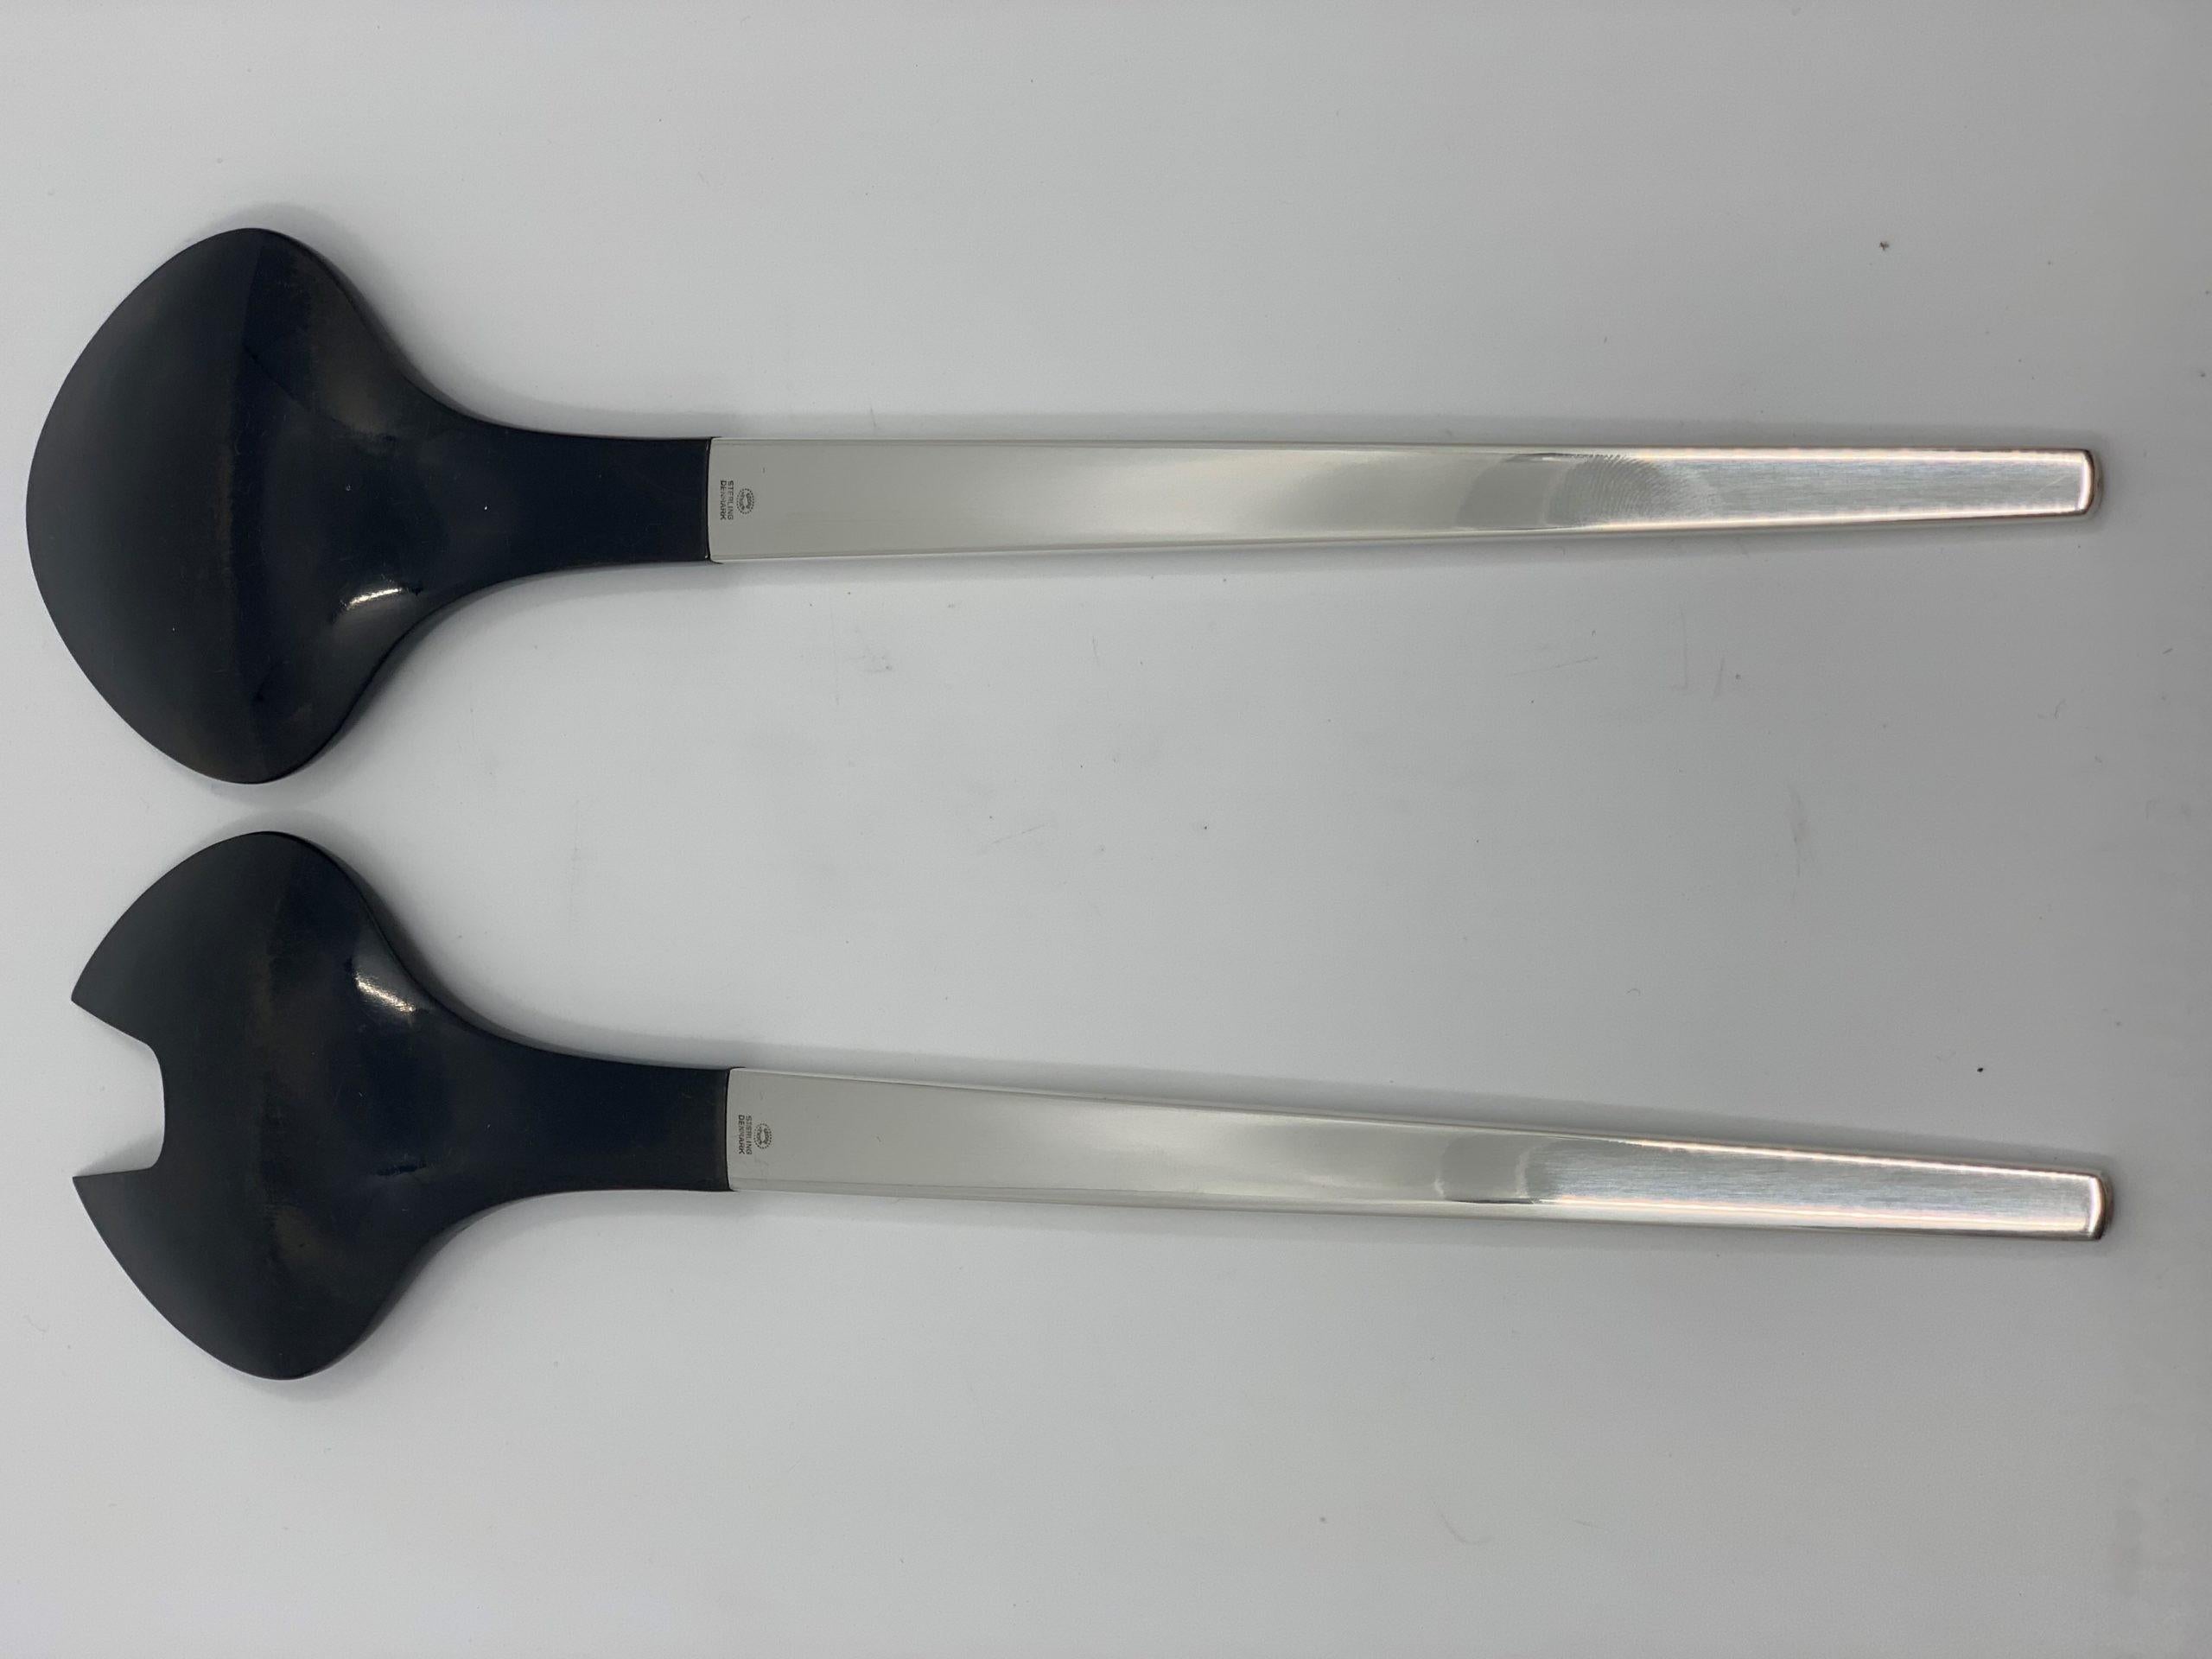 A vintage two piece Georg Jensen salad set in the Caravel pattern, sterling silver handles and melamine, design #111 by Henning Koppel from 1957.

Additional Information:
Material: Sterling Silver
Style: Modern
Hallmarks: With Georg Jensen